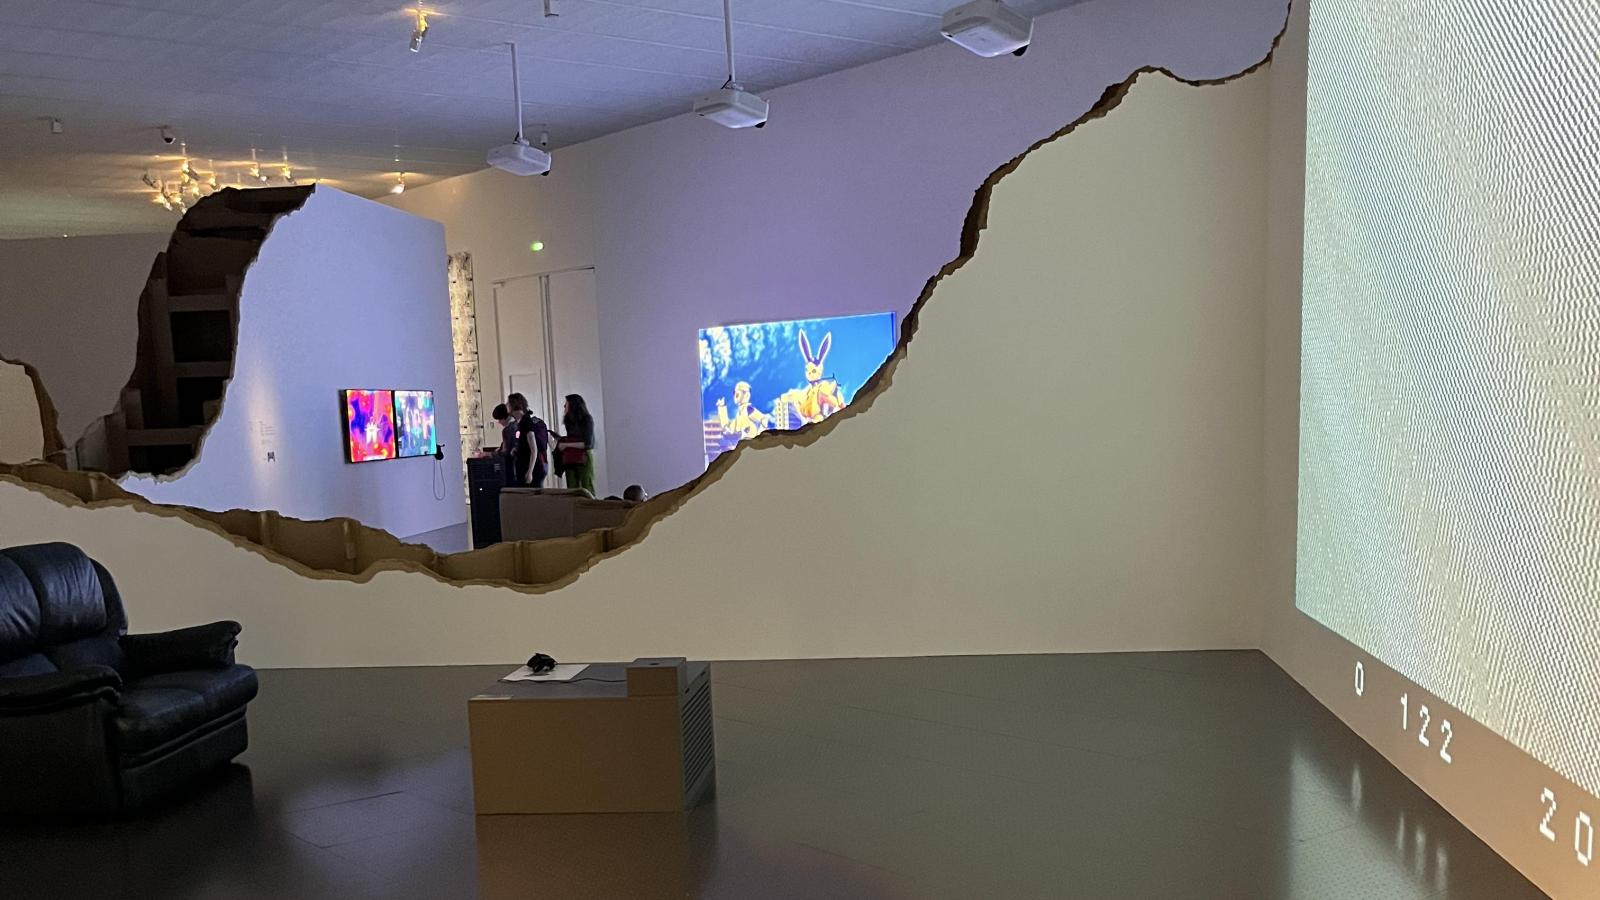 scene of a gallery space with a scalloped wall and video screens